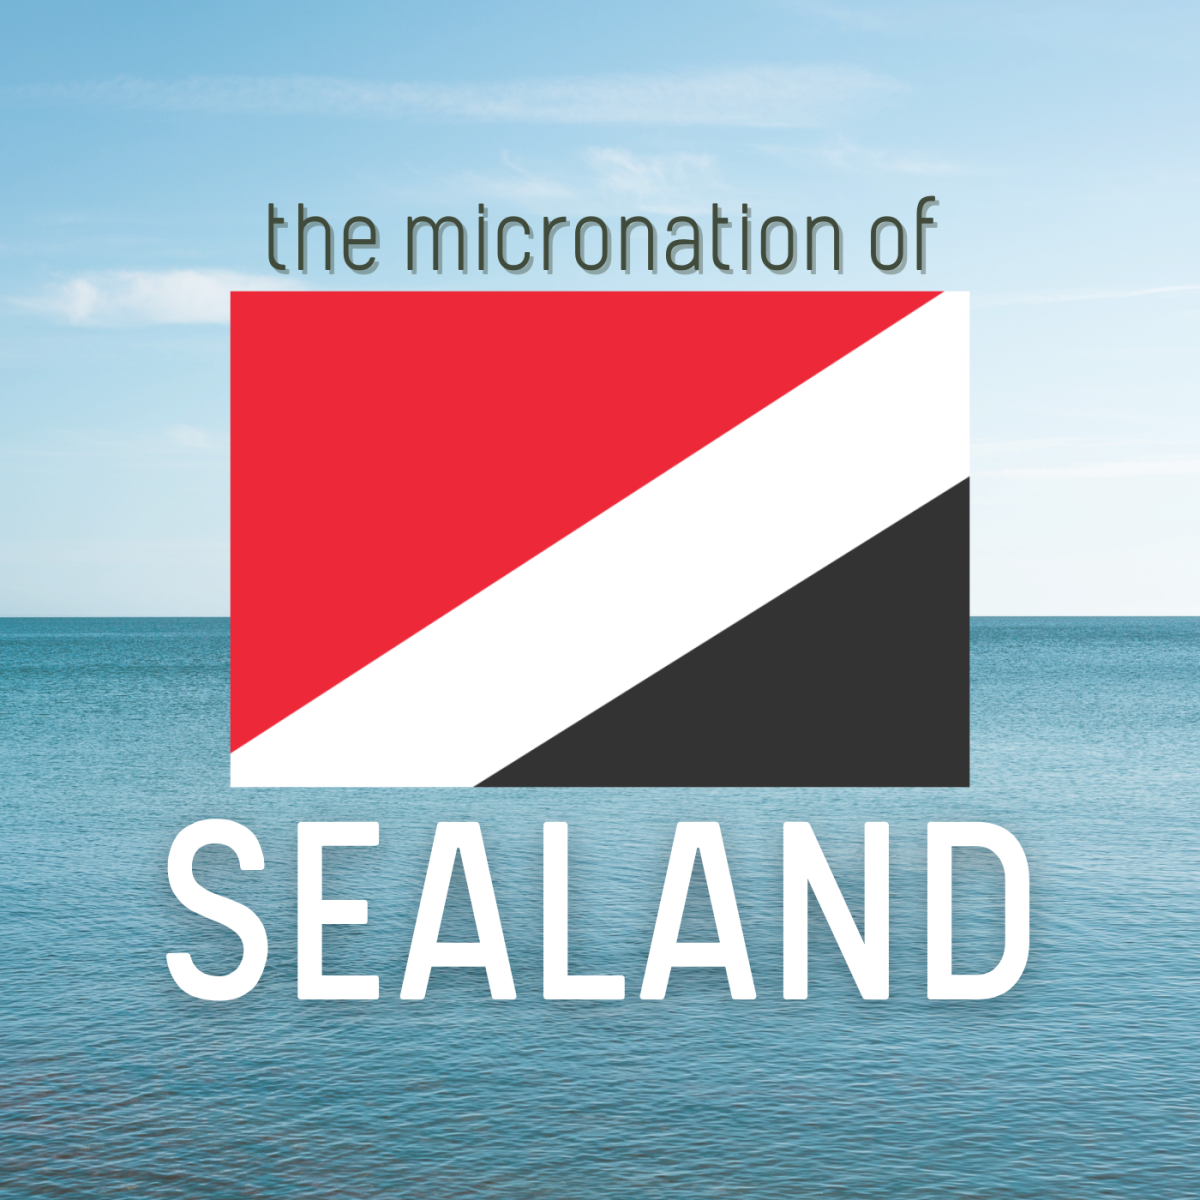 What Is the Sealand Micronation?